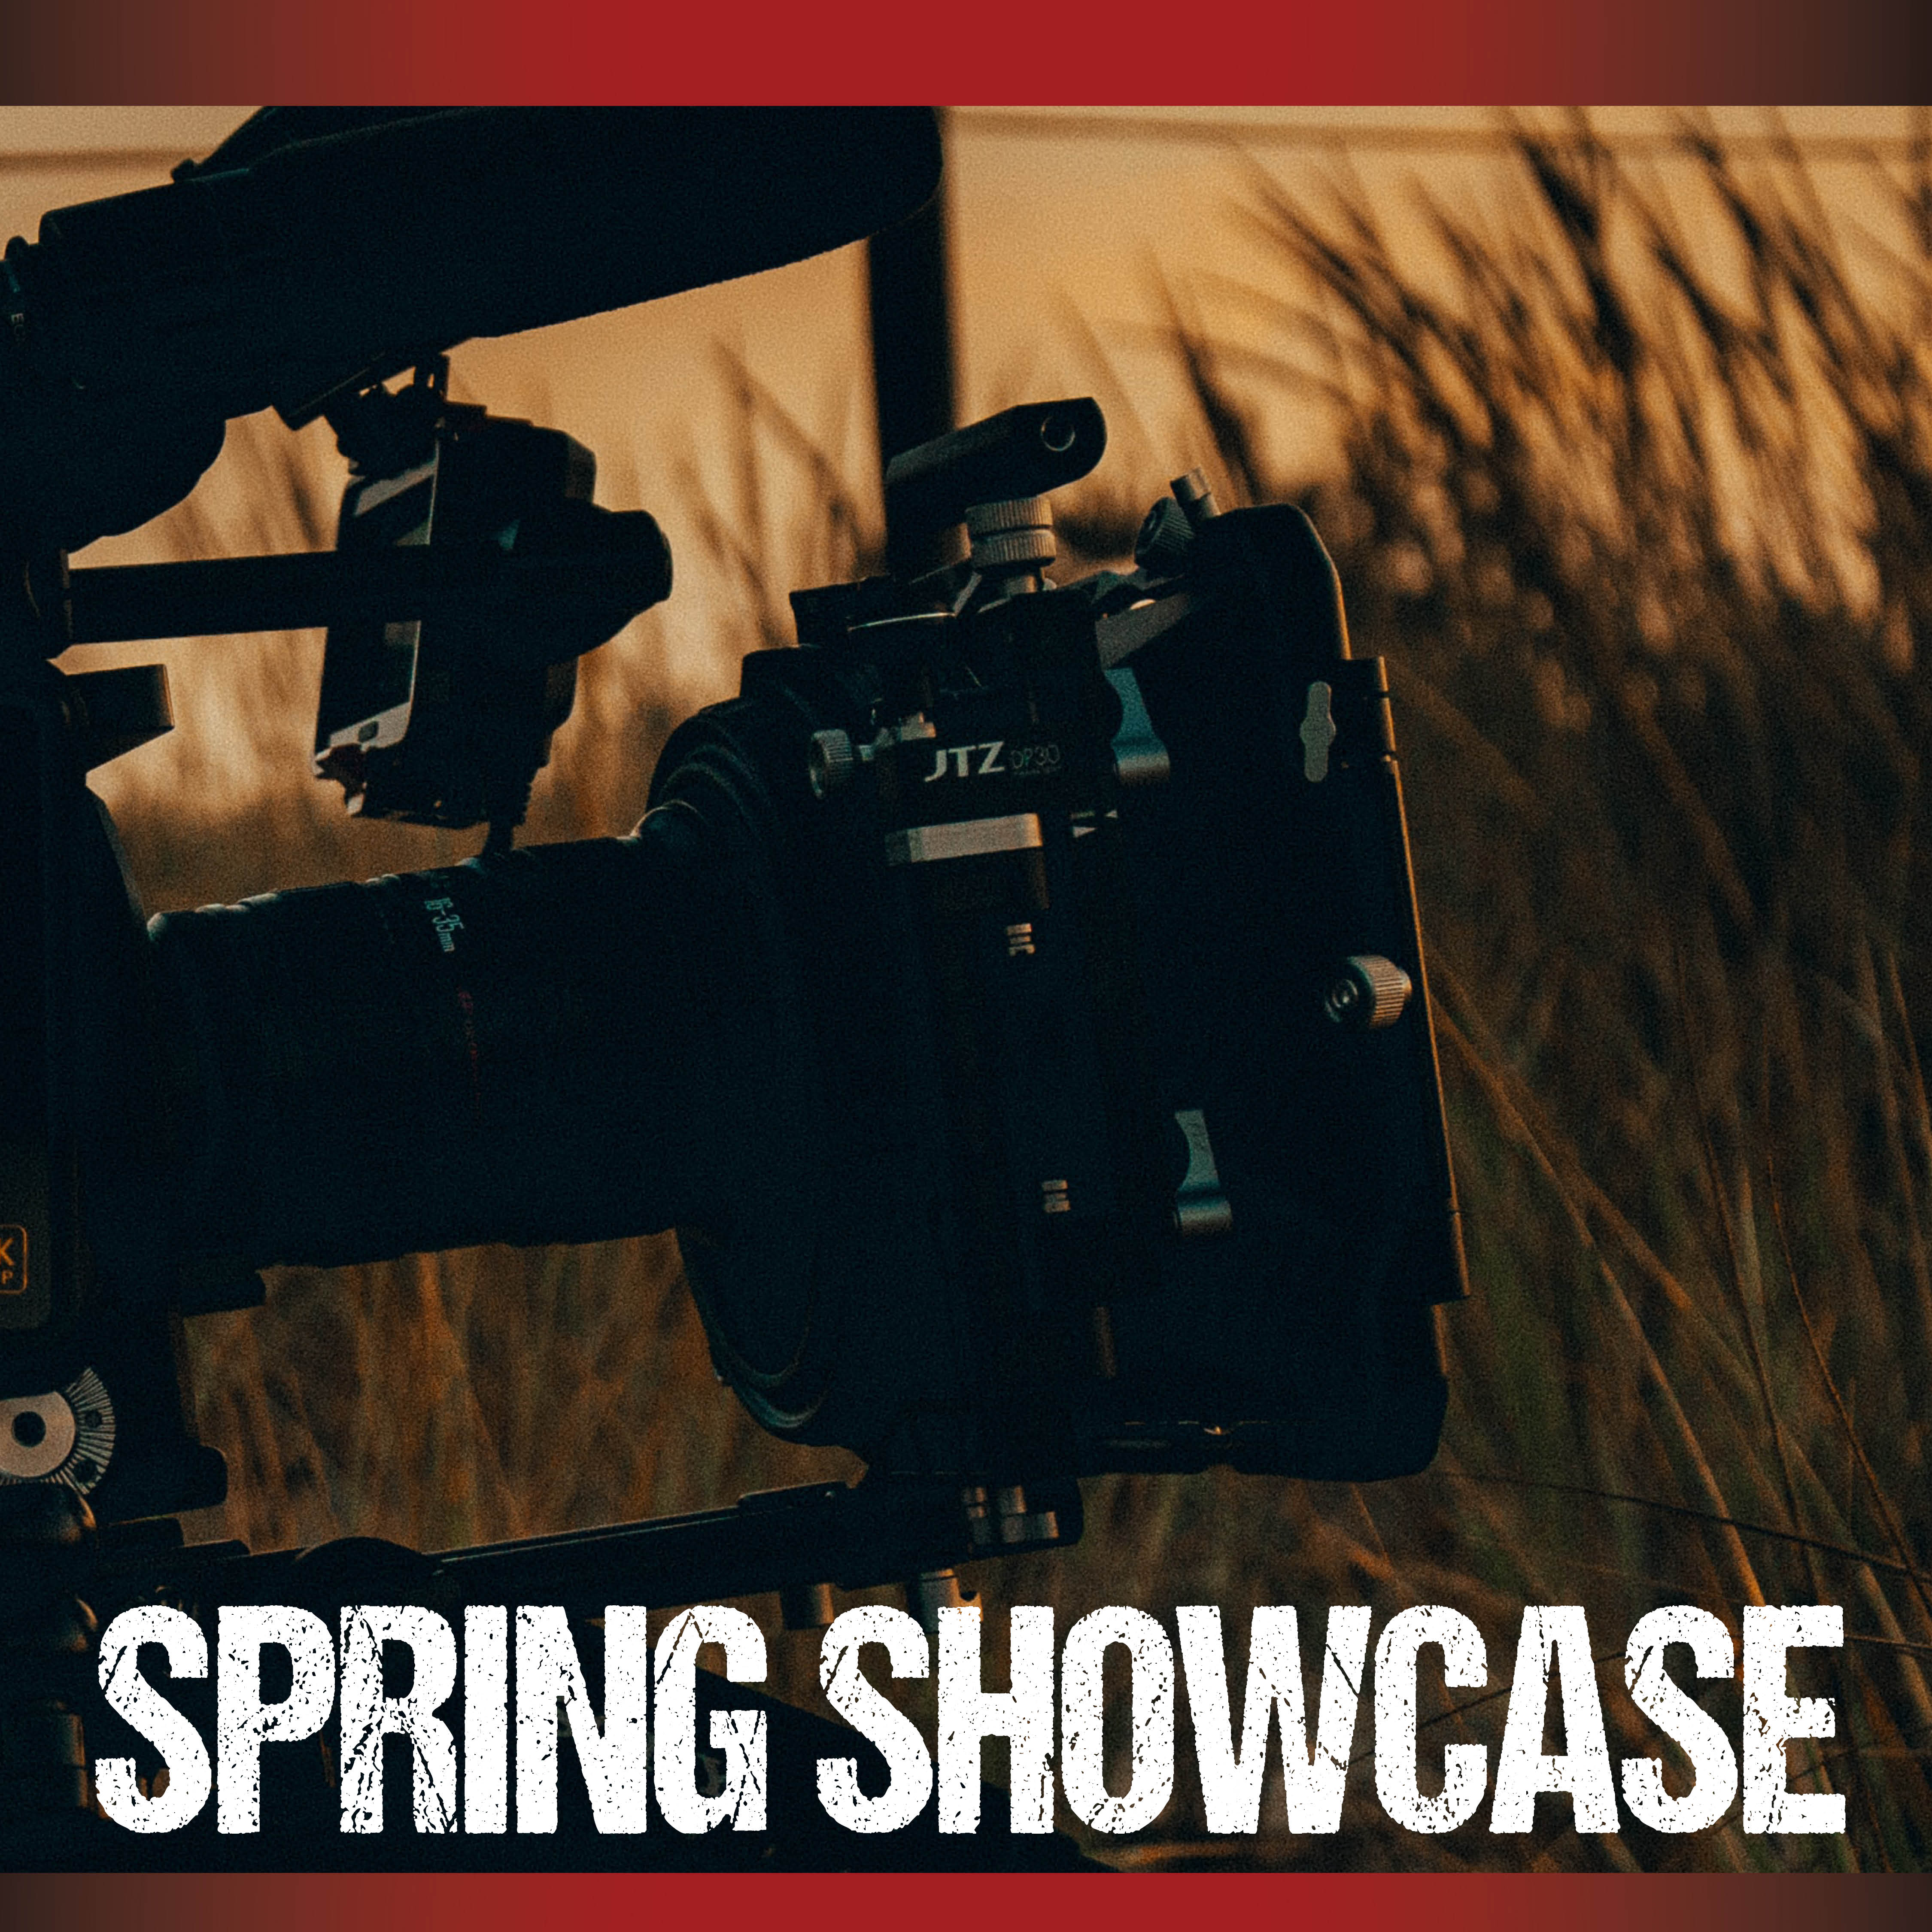 photo of a movie camera with text that says spring showcase